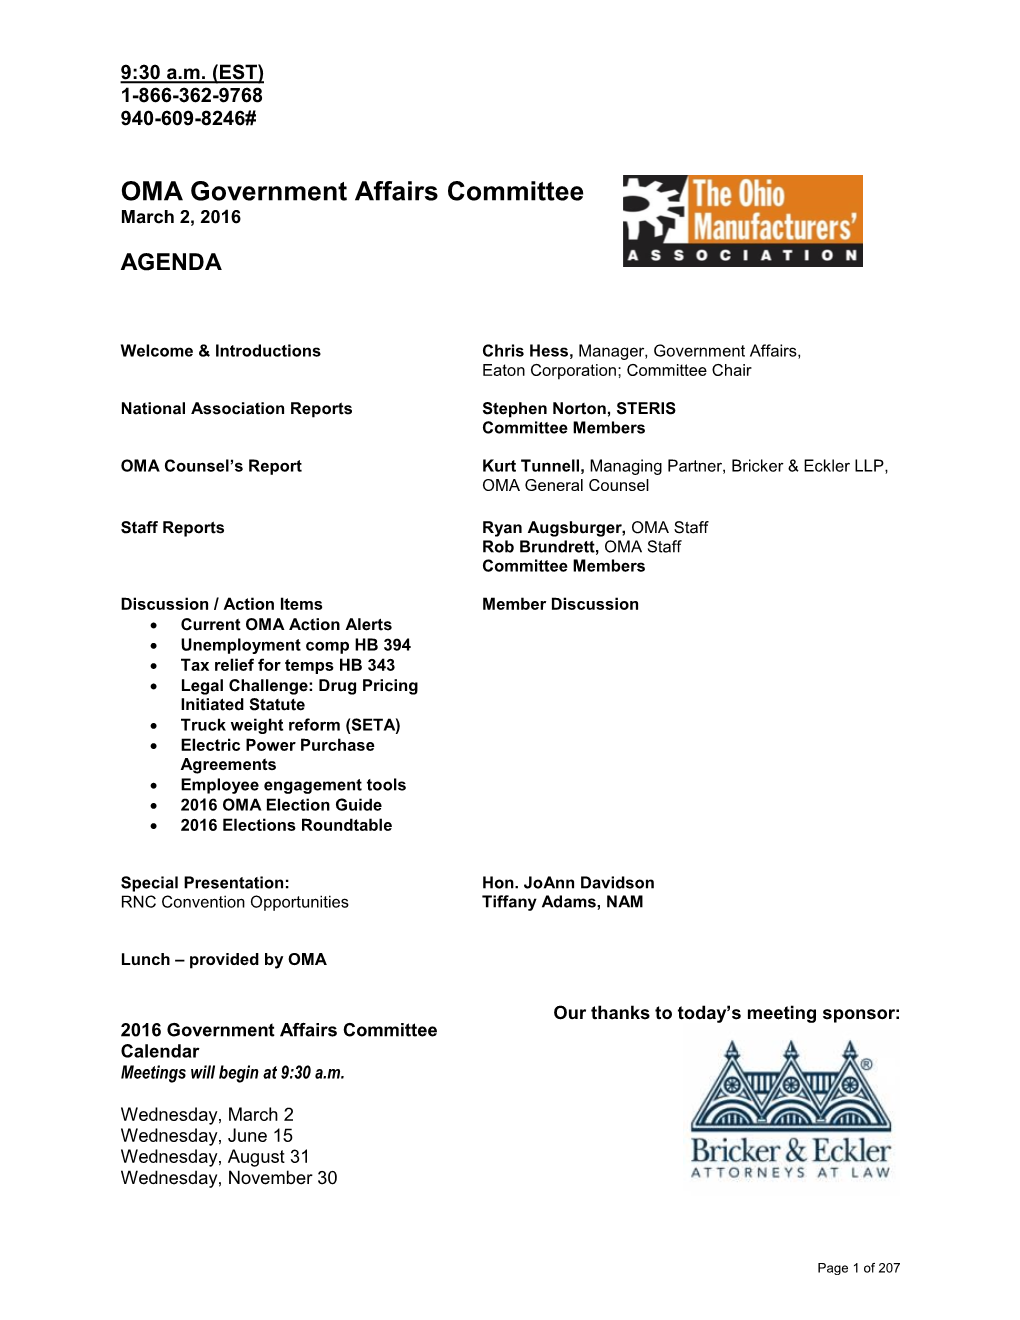 OMA Government Affairs Committee March 2, 2016